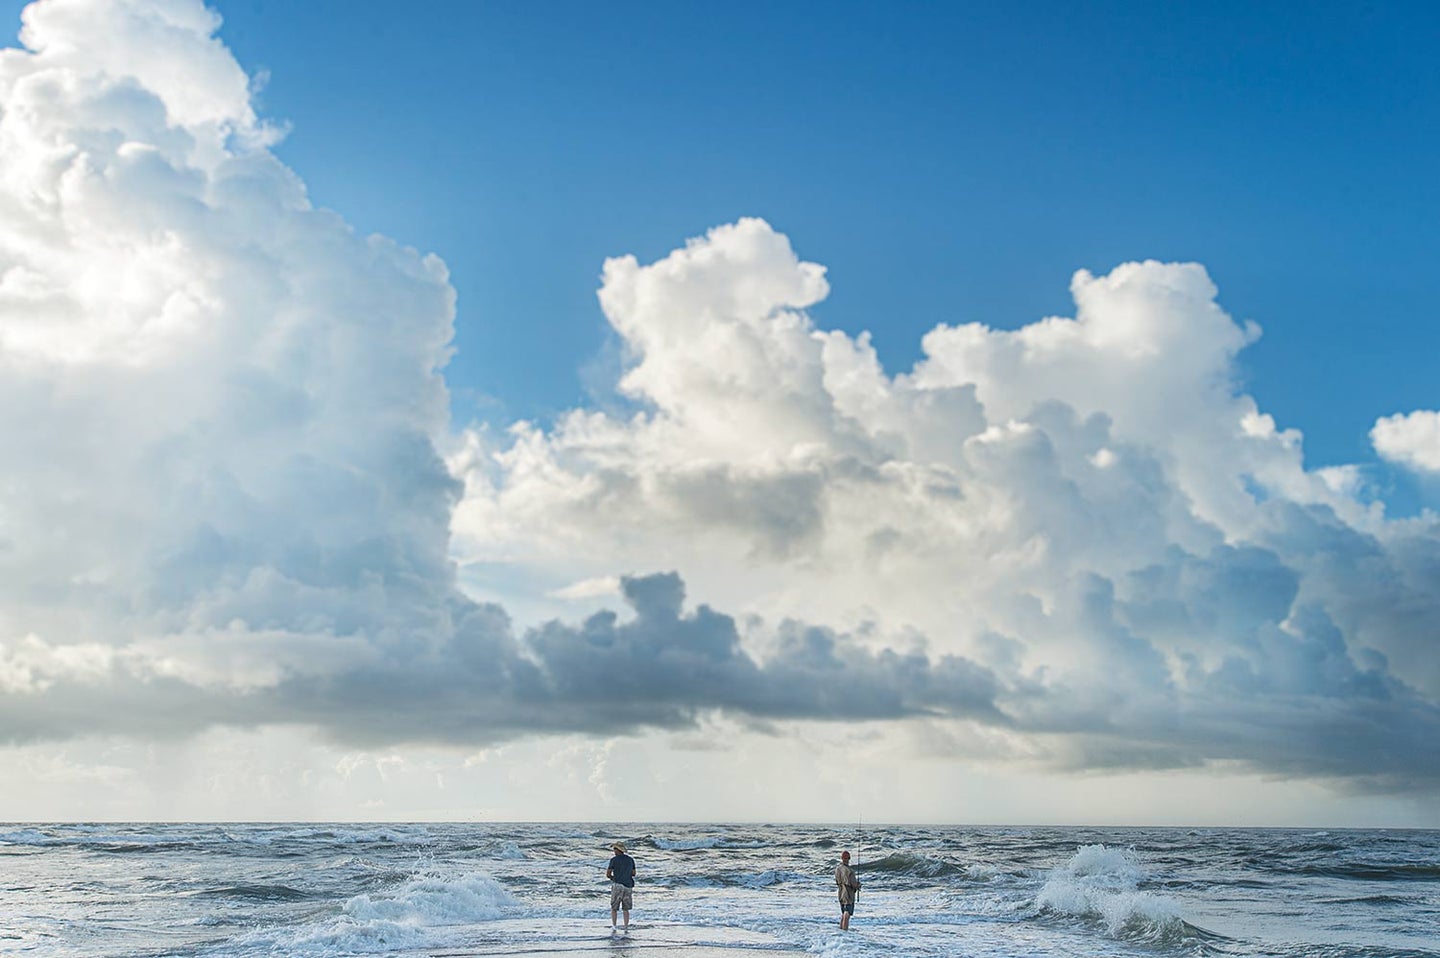 Two people standing in the surf while fishing.